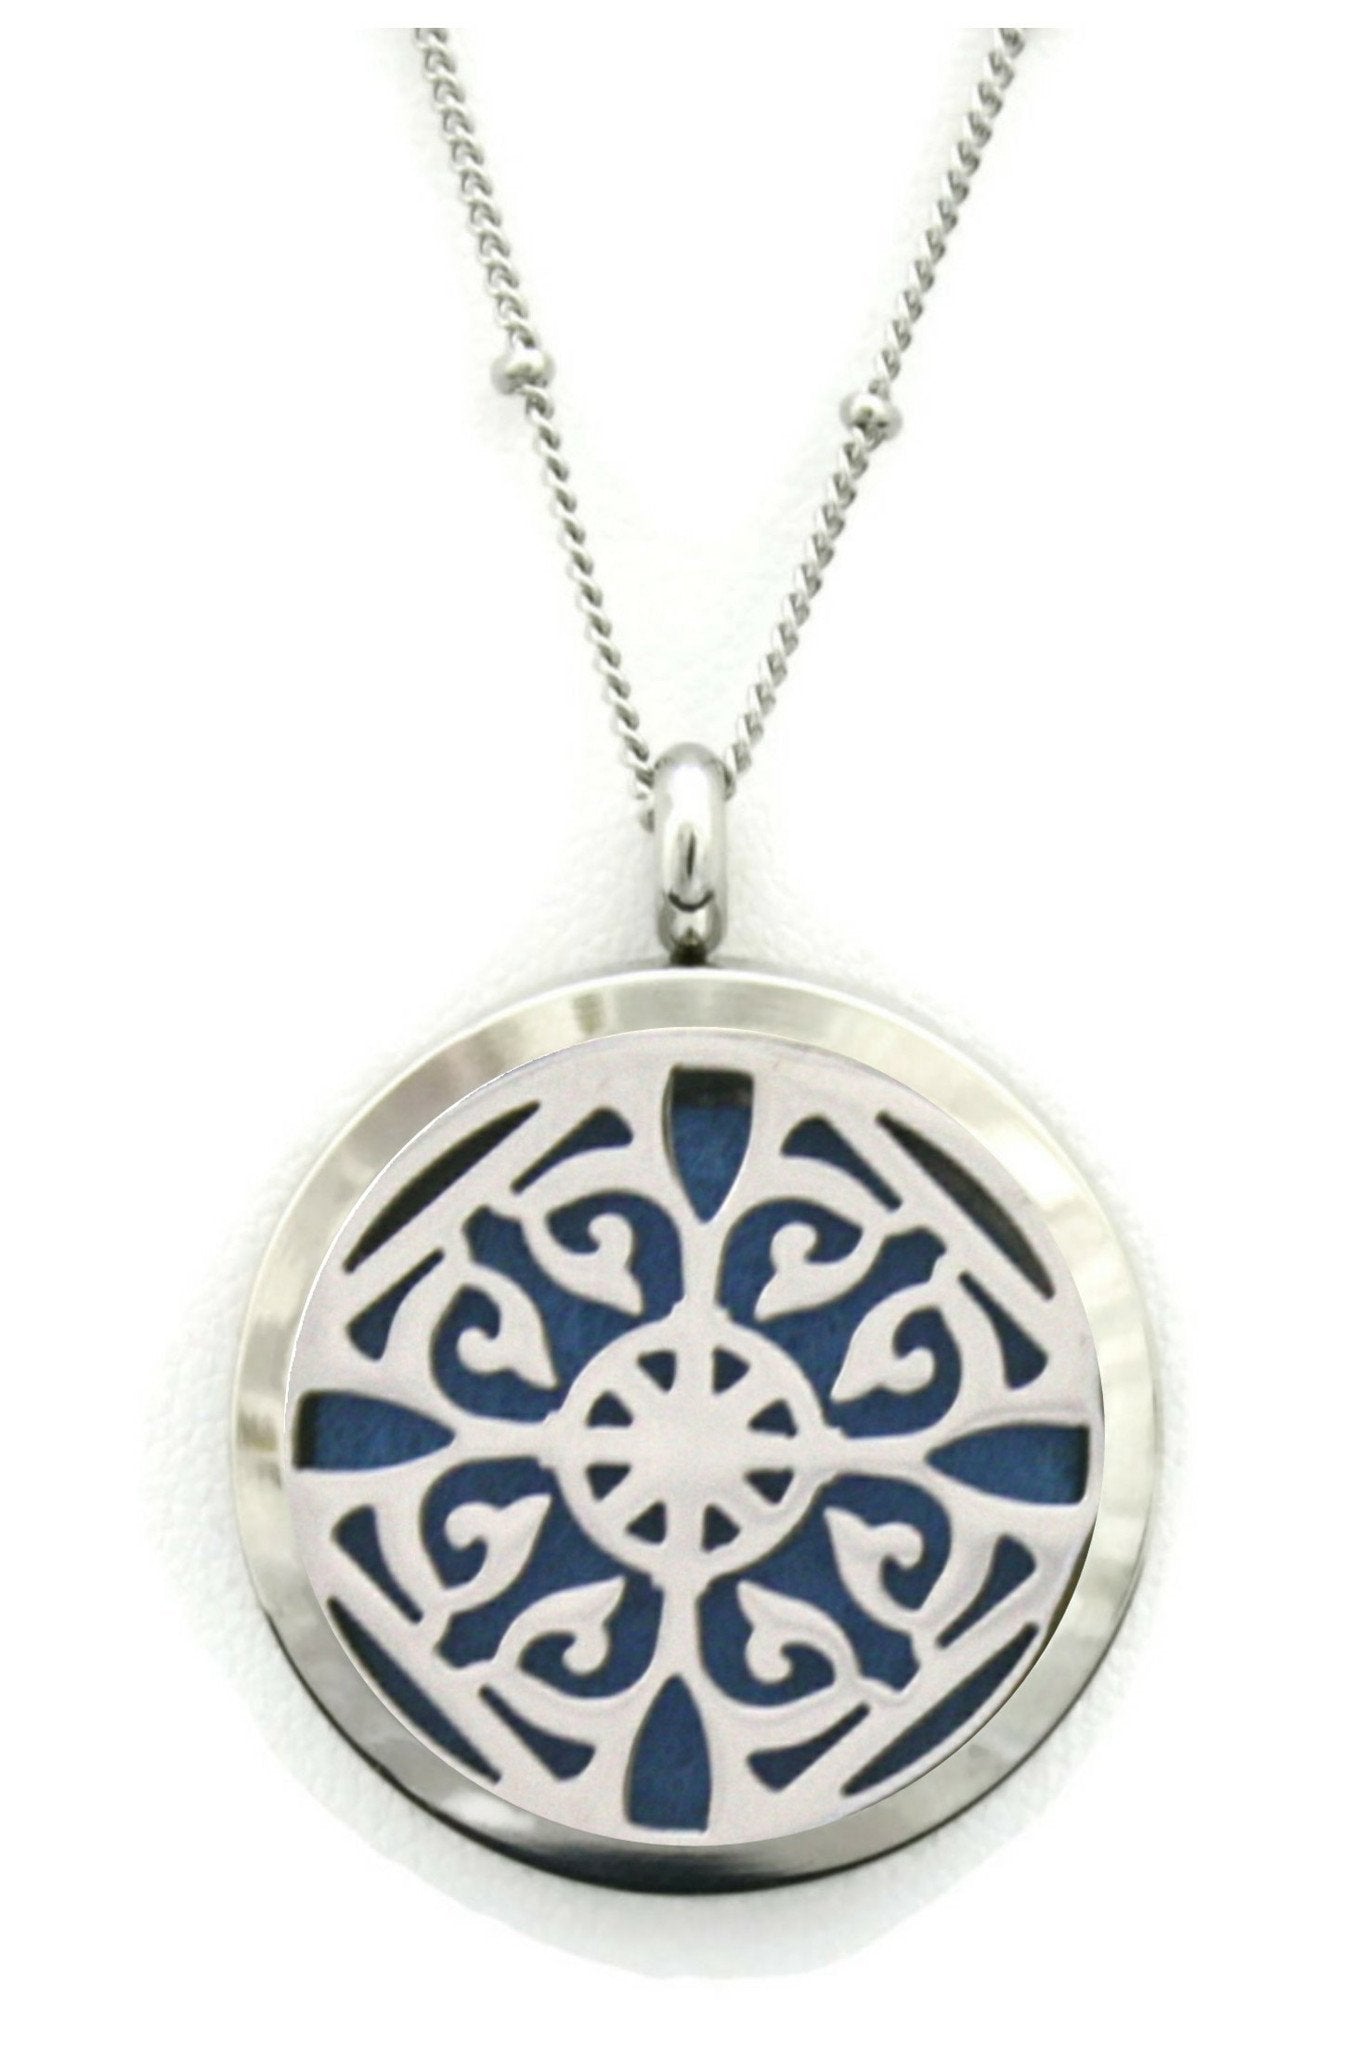 Classic Filigree Stainless Steel Silver Essential Oil Diffuser Necklace- 30mm- 30"-Diffuser Necklace-Destination Oils